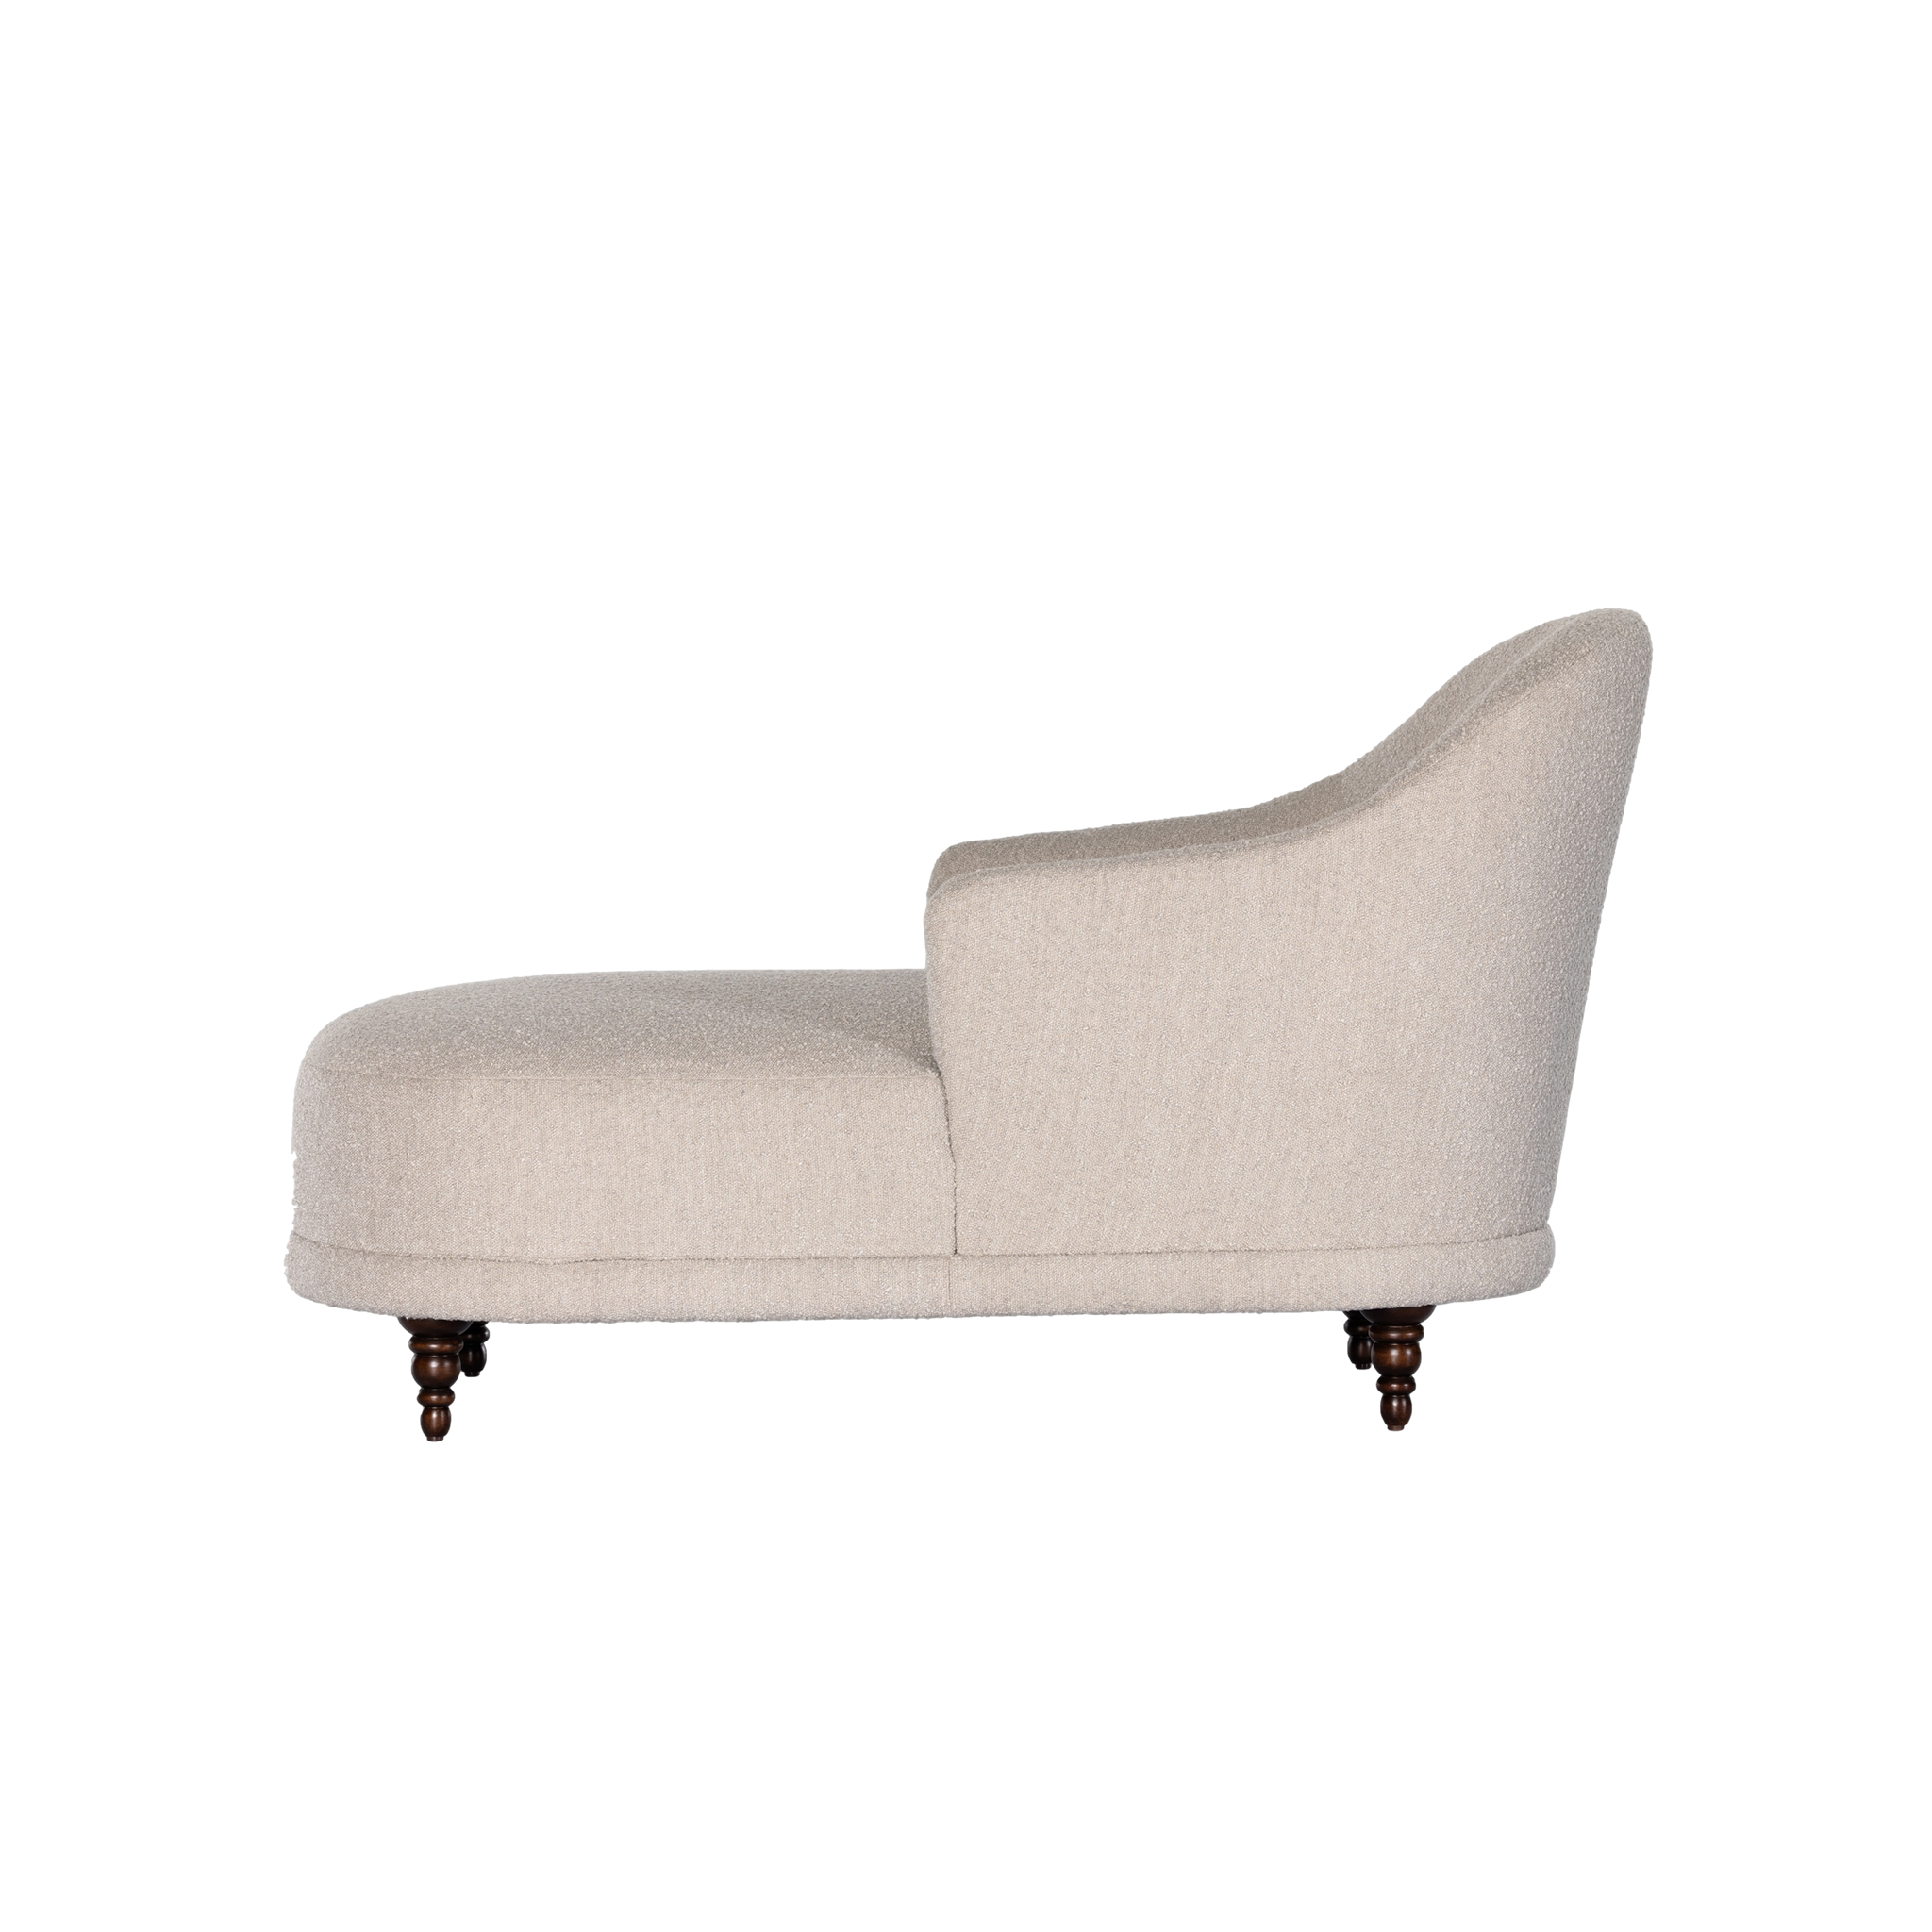 Marnie Chaise Lounge in Knoll Sand